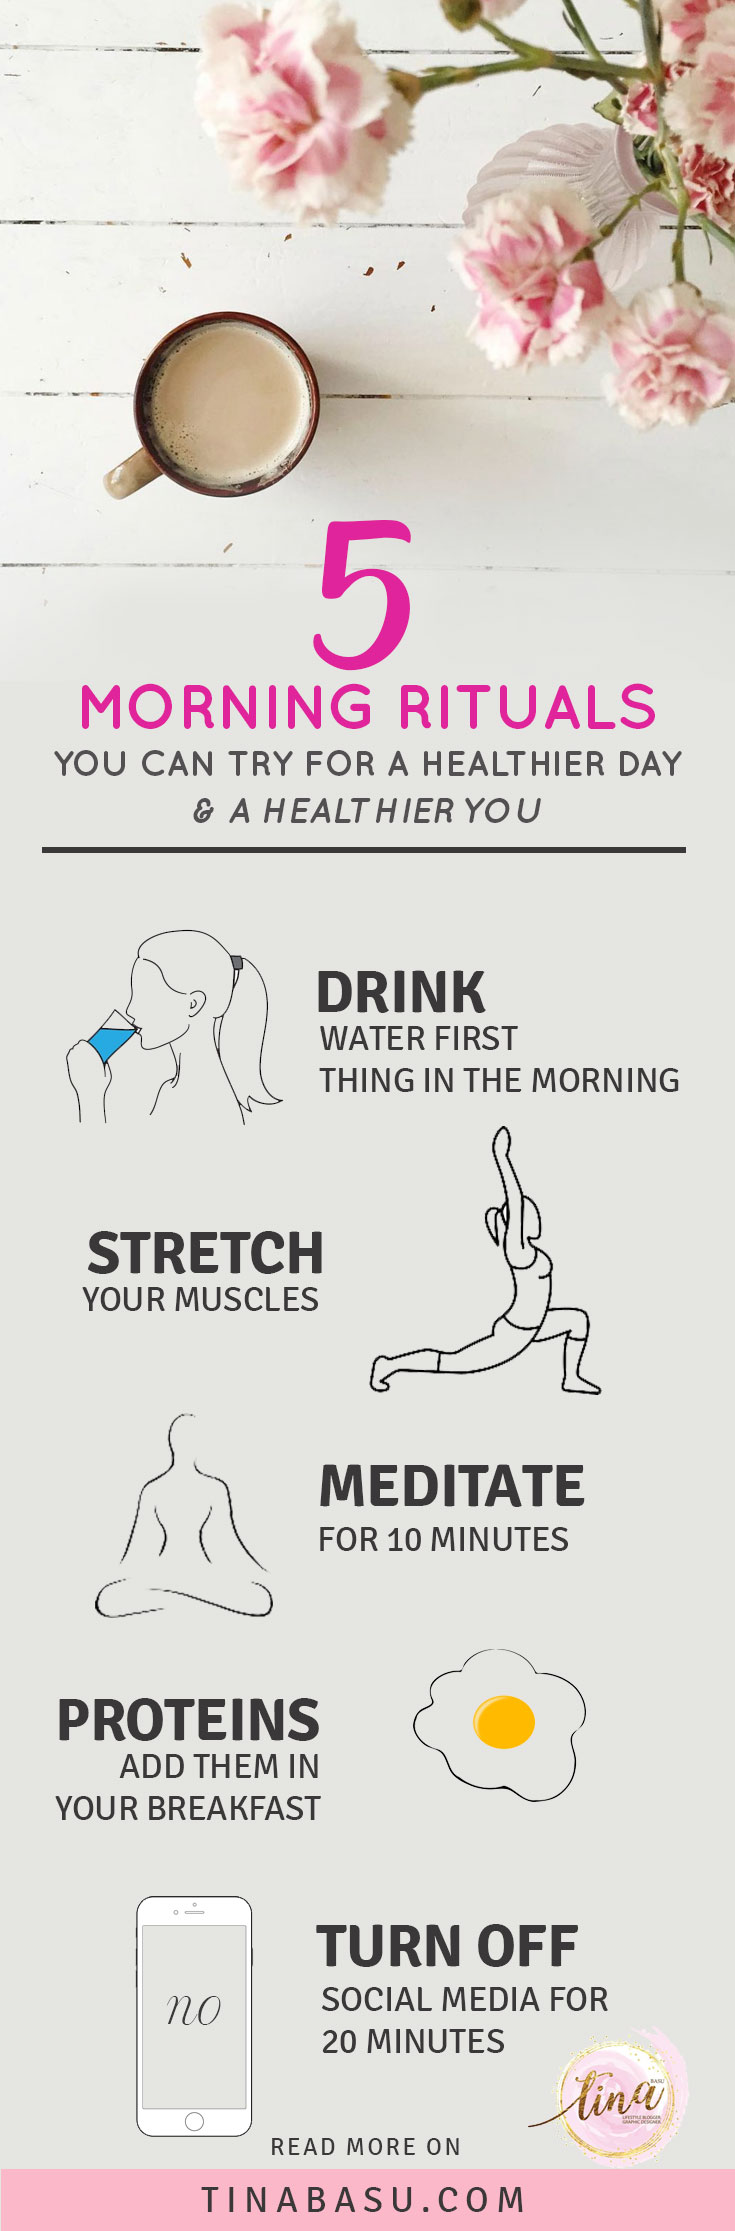 5 morning rituals for healthier day